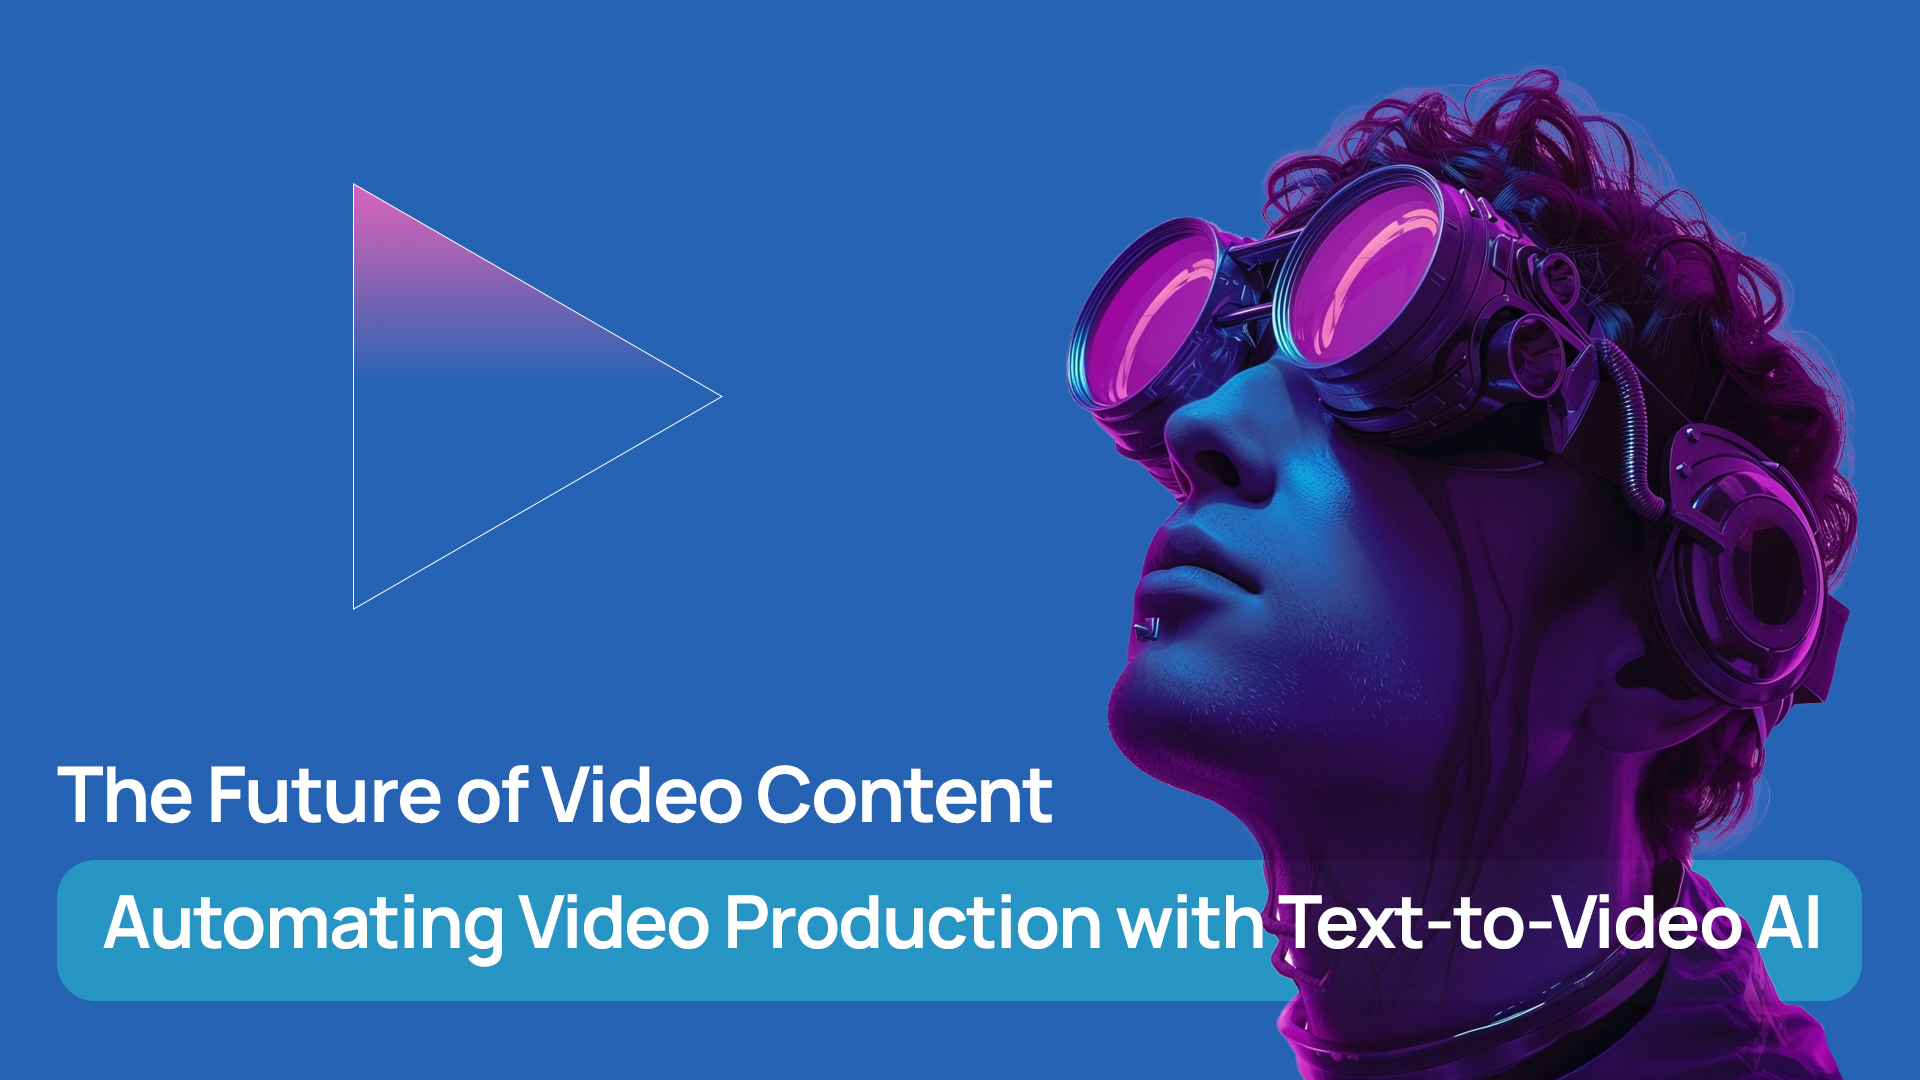 The Future of Video Content: Automating Video Production with Text-to-Video AI